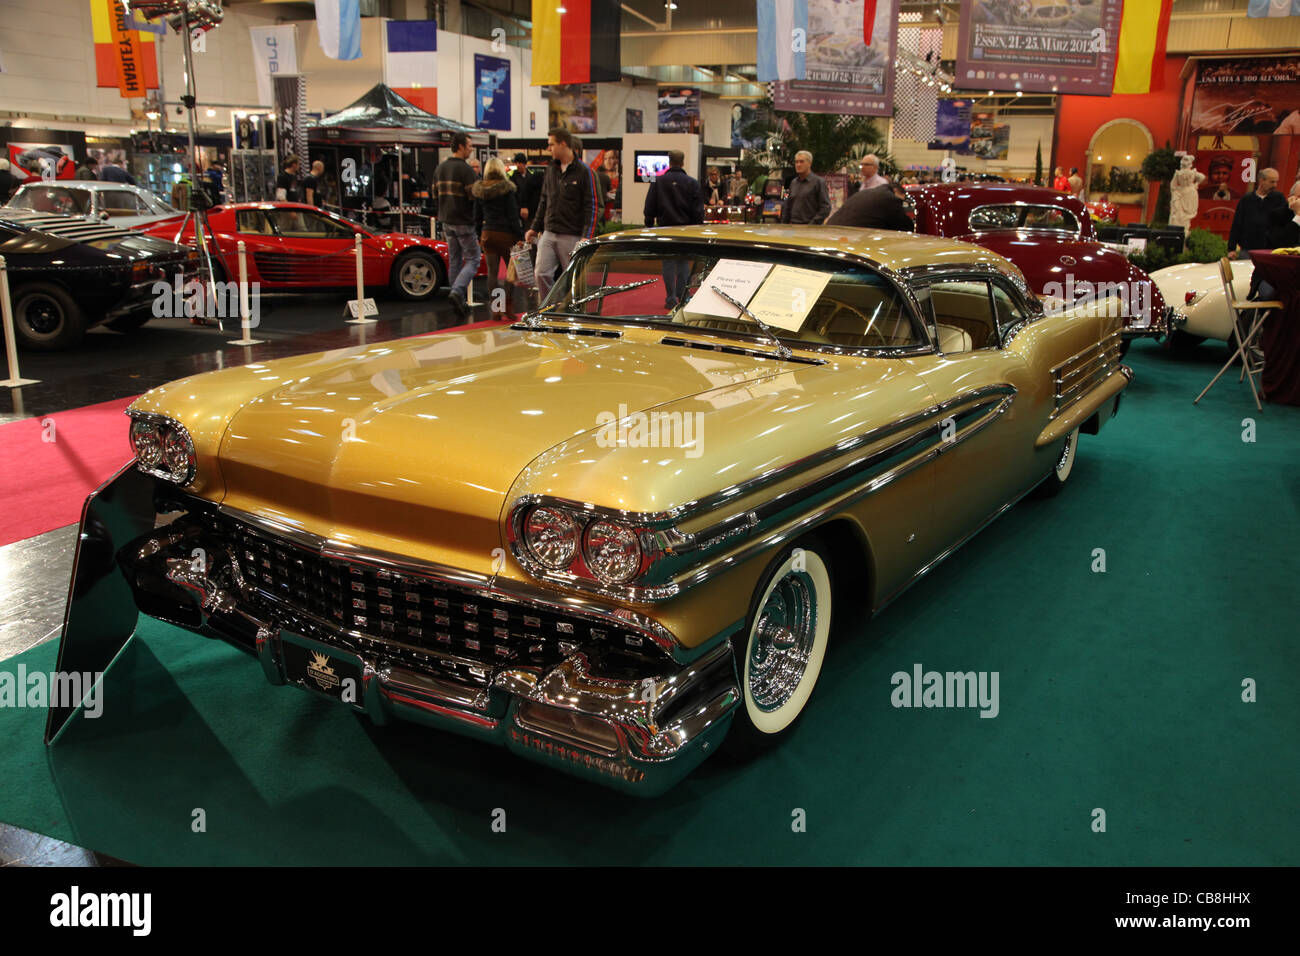 The 1958 Oldsmobile shown at the Essen Motor Show in Essen, Germany, on November 29, 2011 Stock Photo